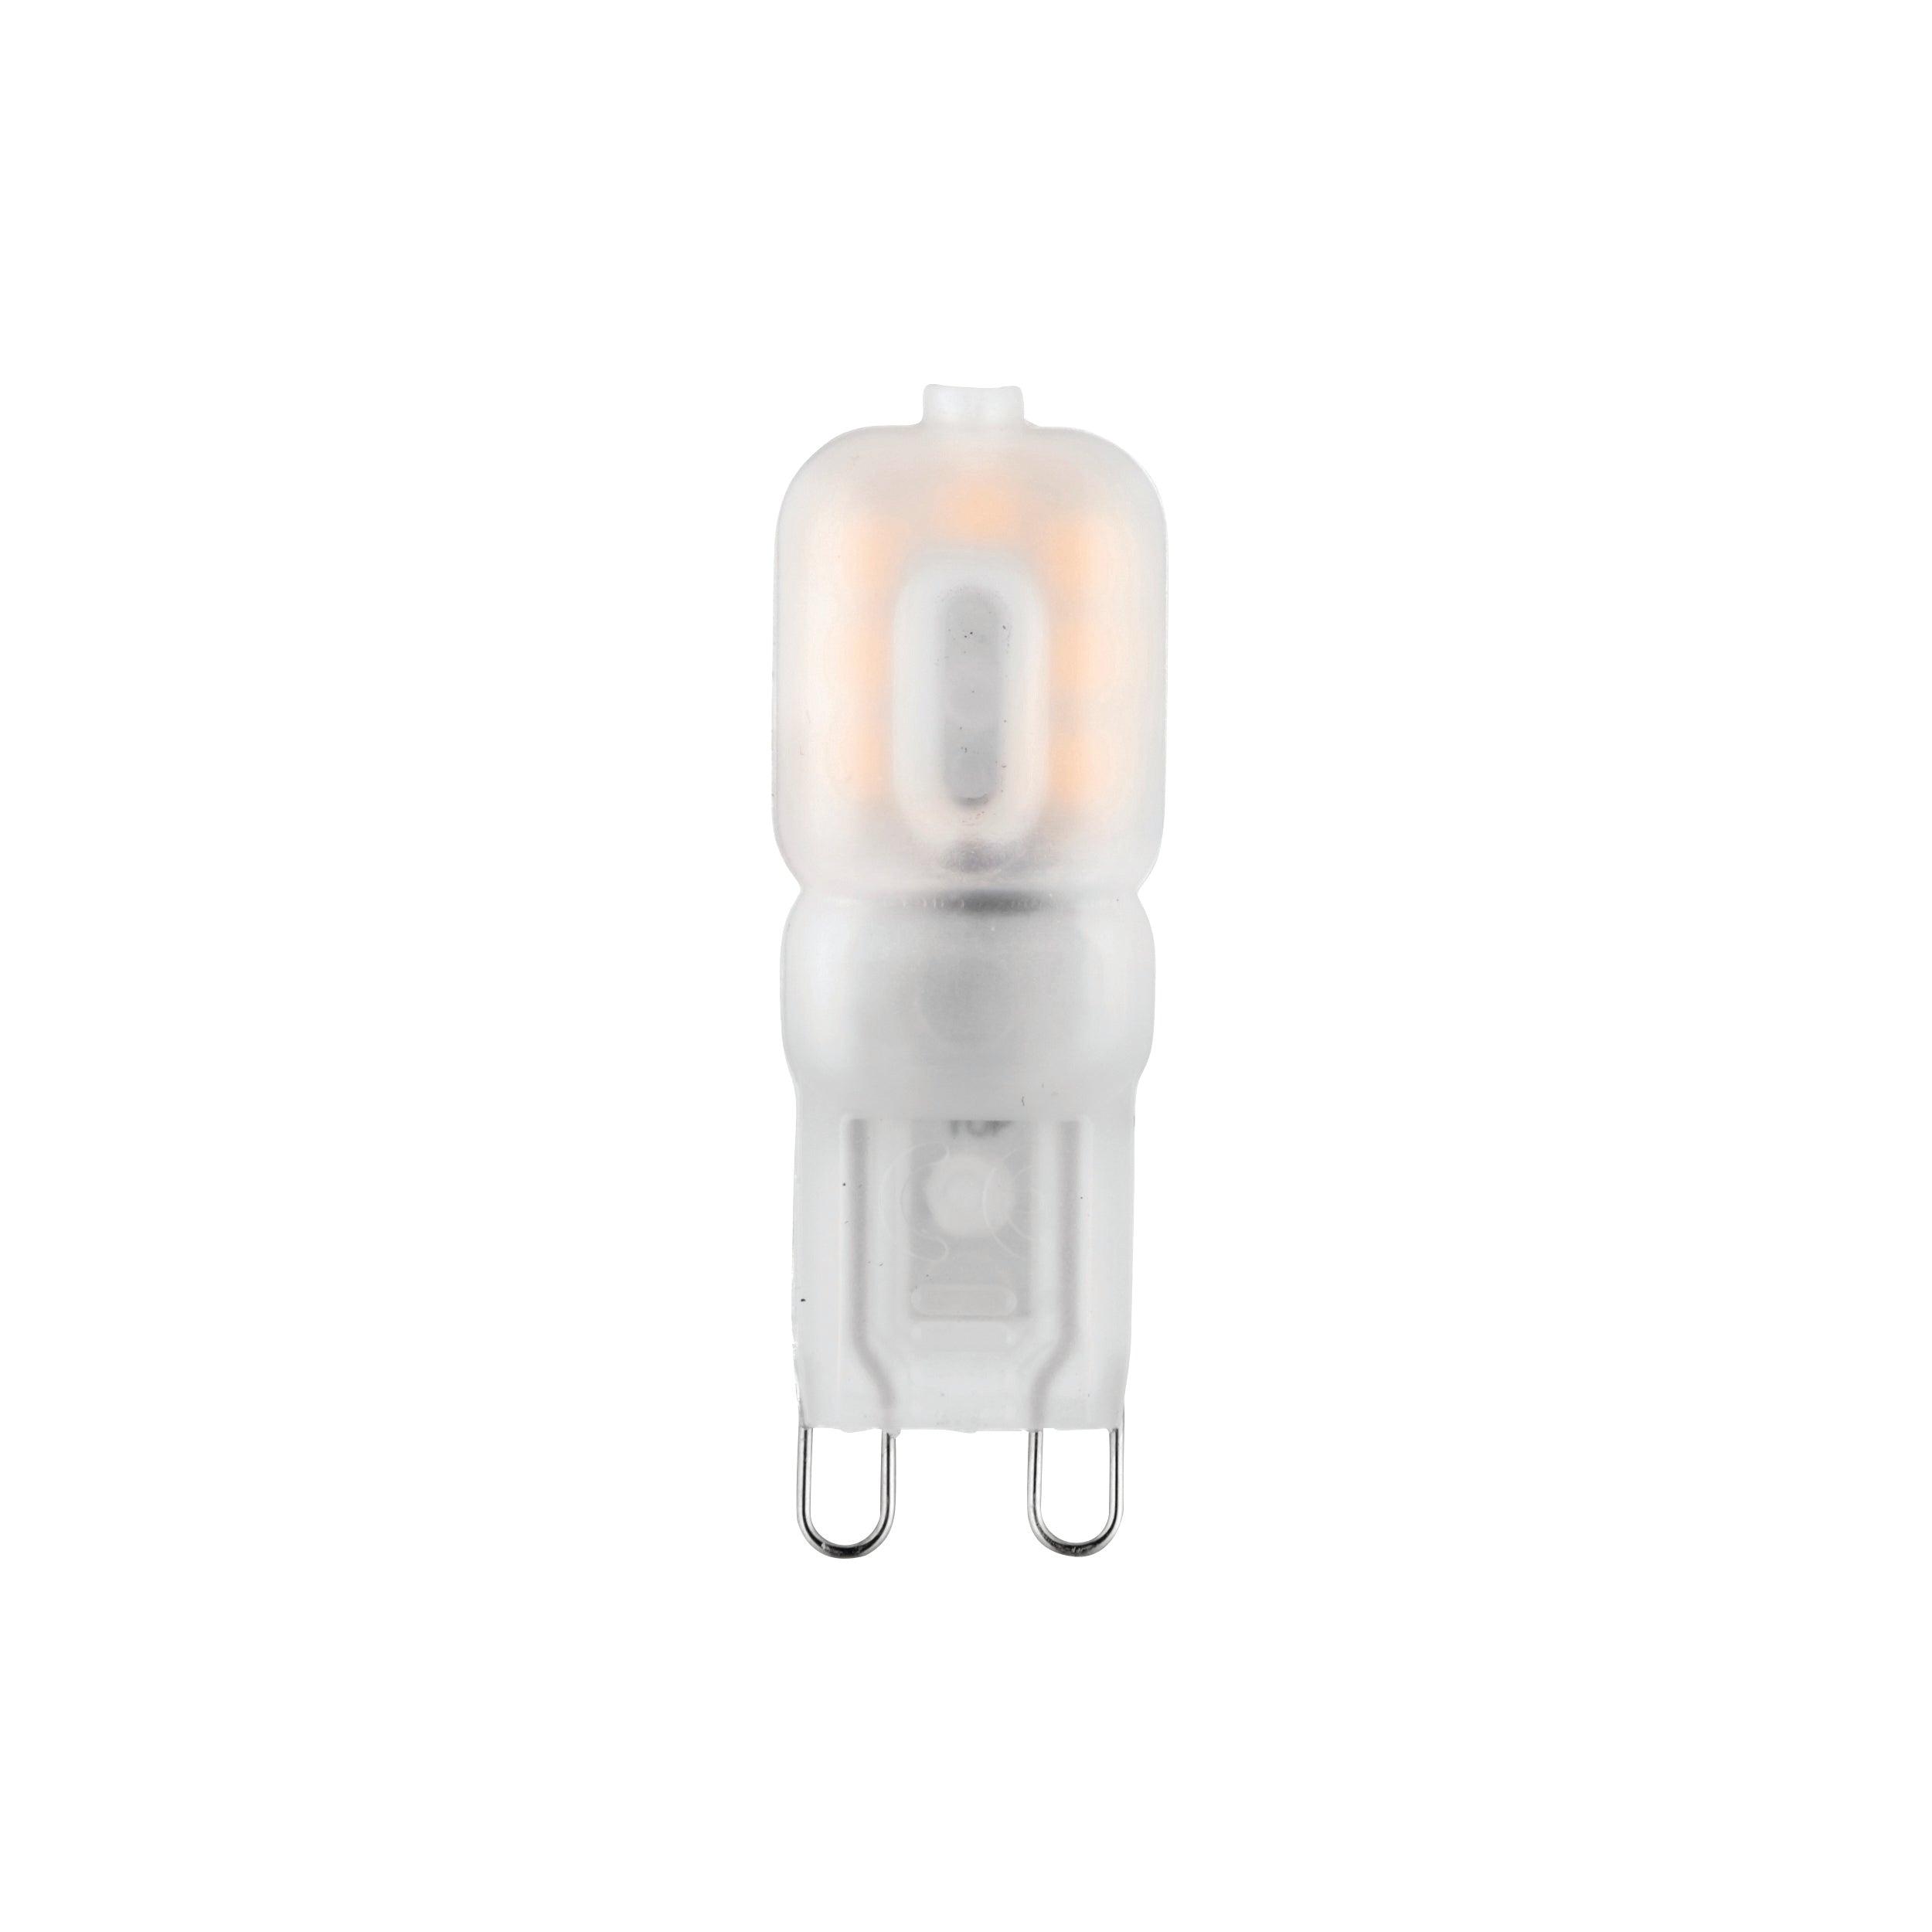 G9 LED bulb capsule. Warm White 2000K 2W 200lm. Non-Dimmable